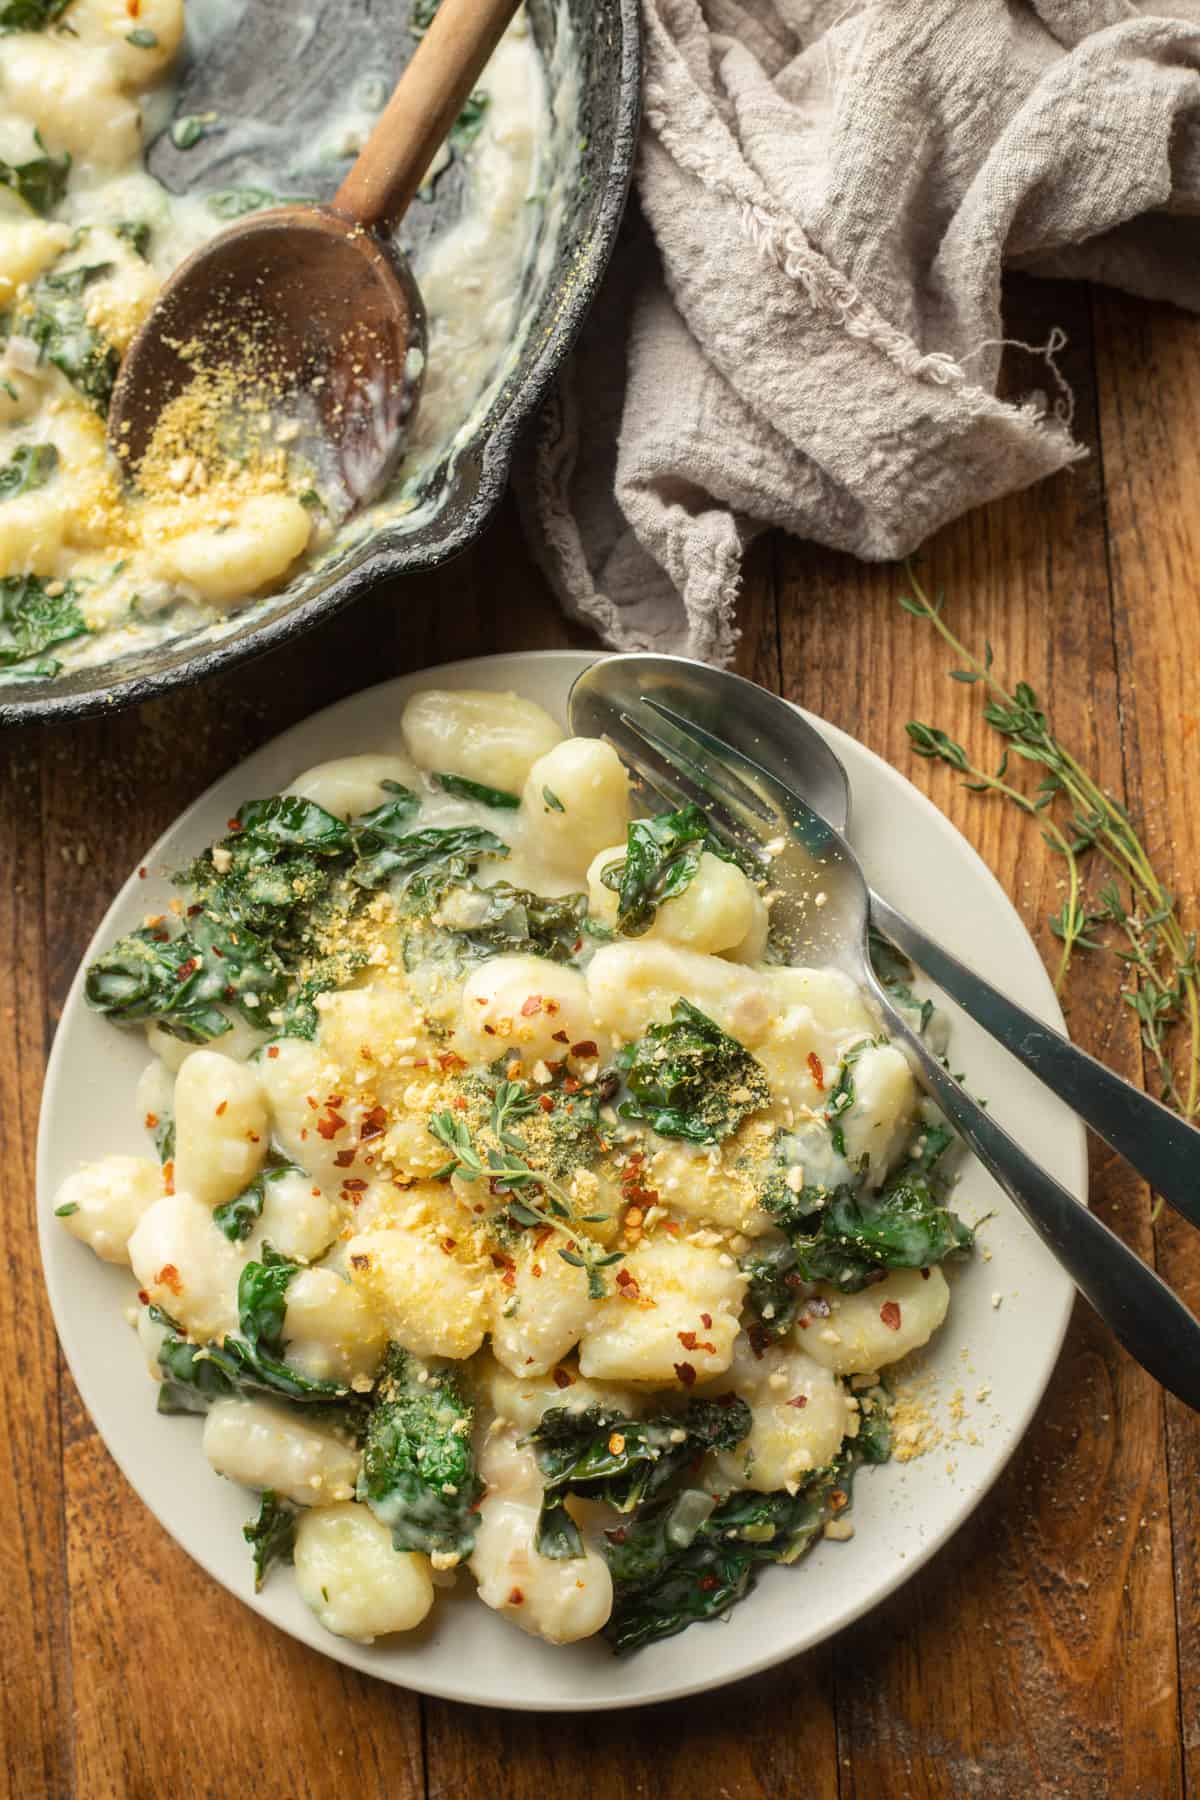 Wooden surface set with skillet, cloth, and plate of vegan gnocchi and kale in creamy sauce.